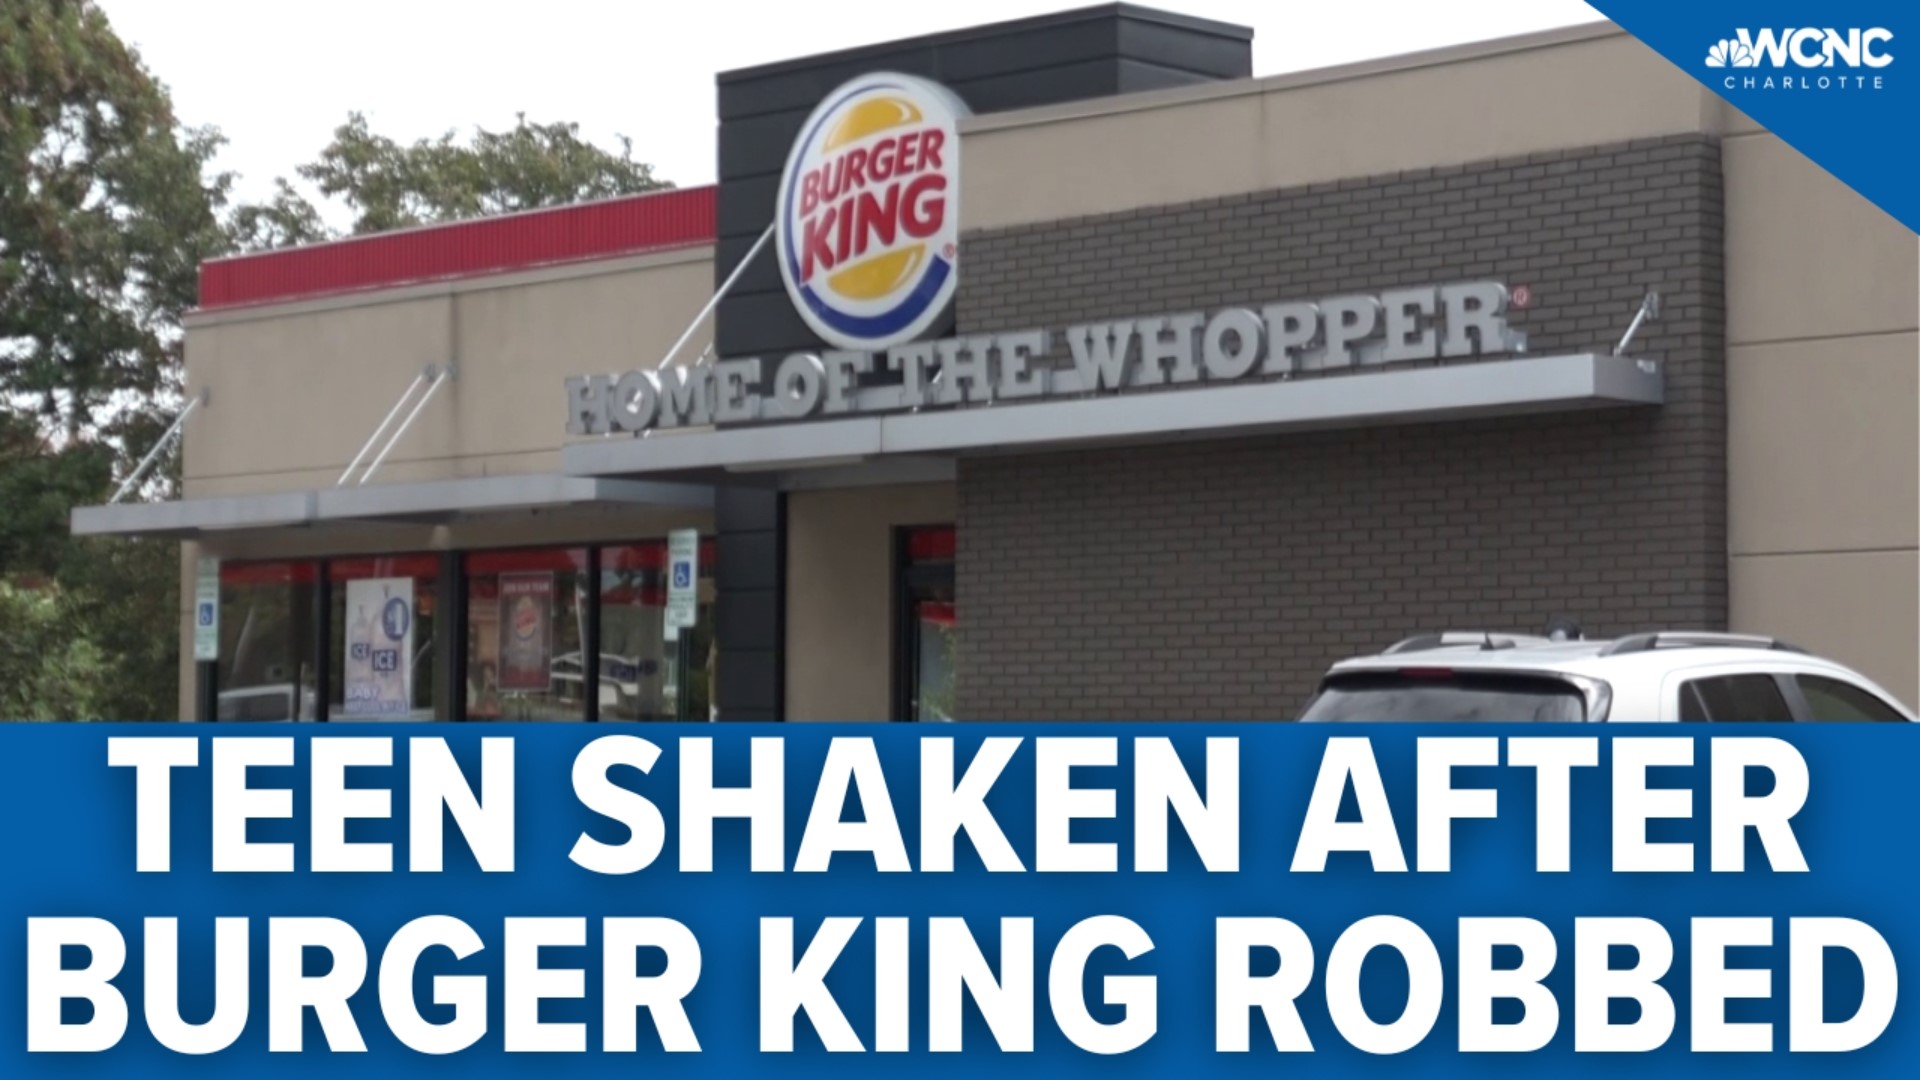 The west Charlotte Burger King the teen works at was robbed over the weekend.